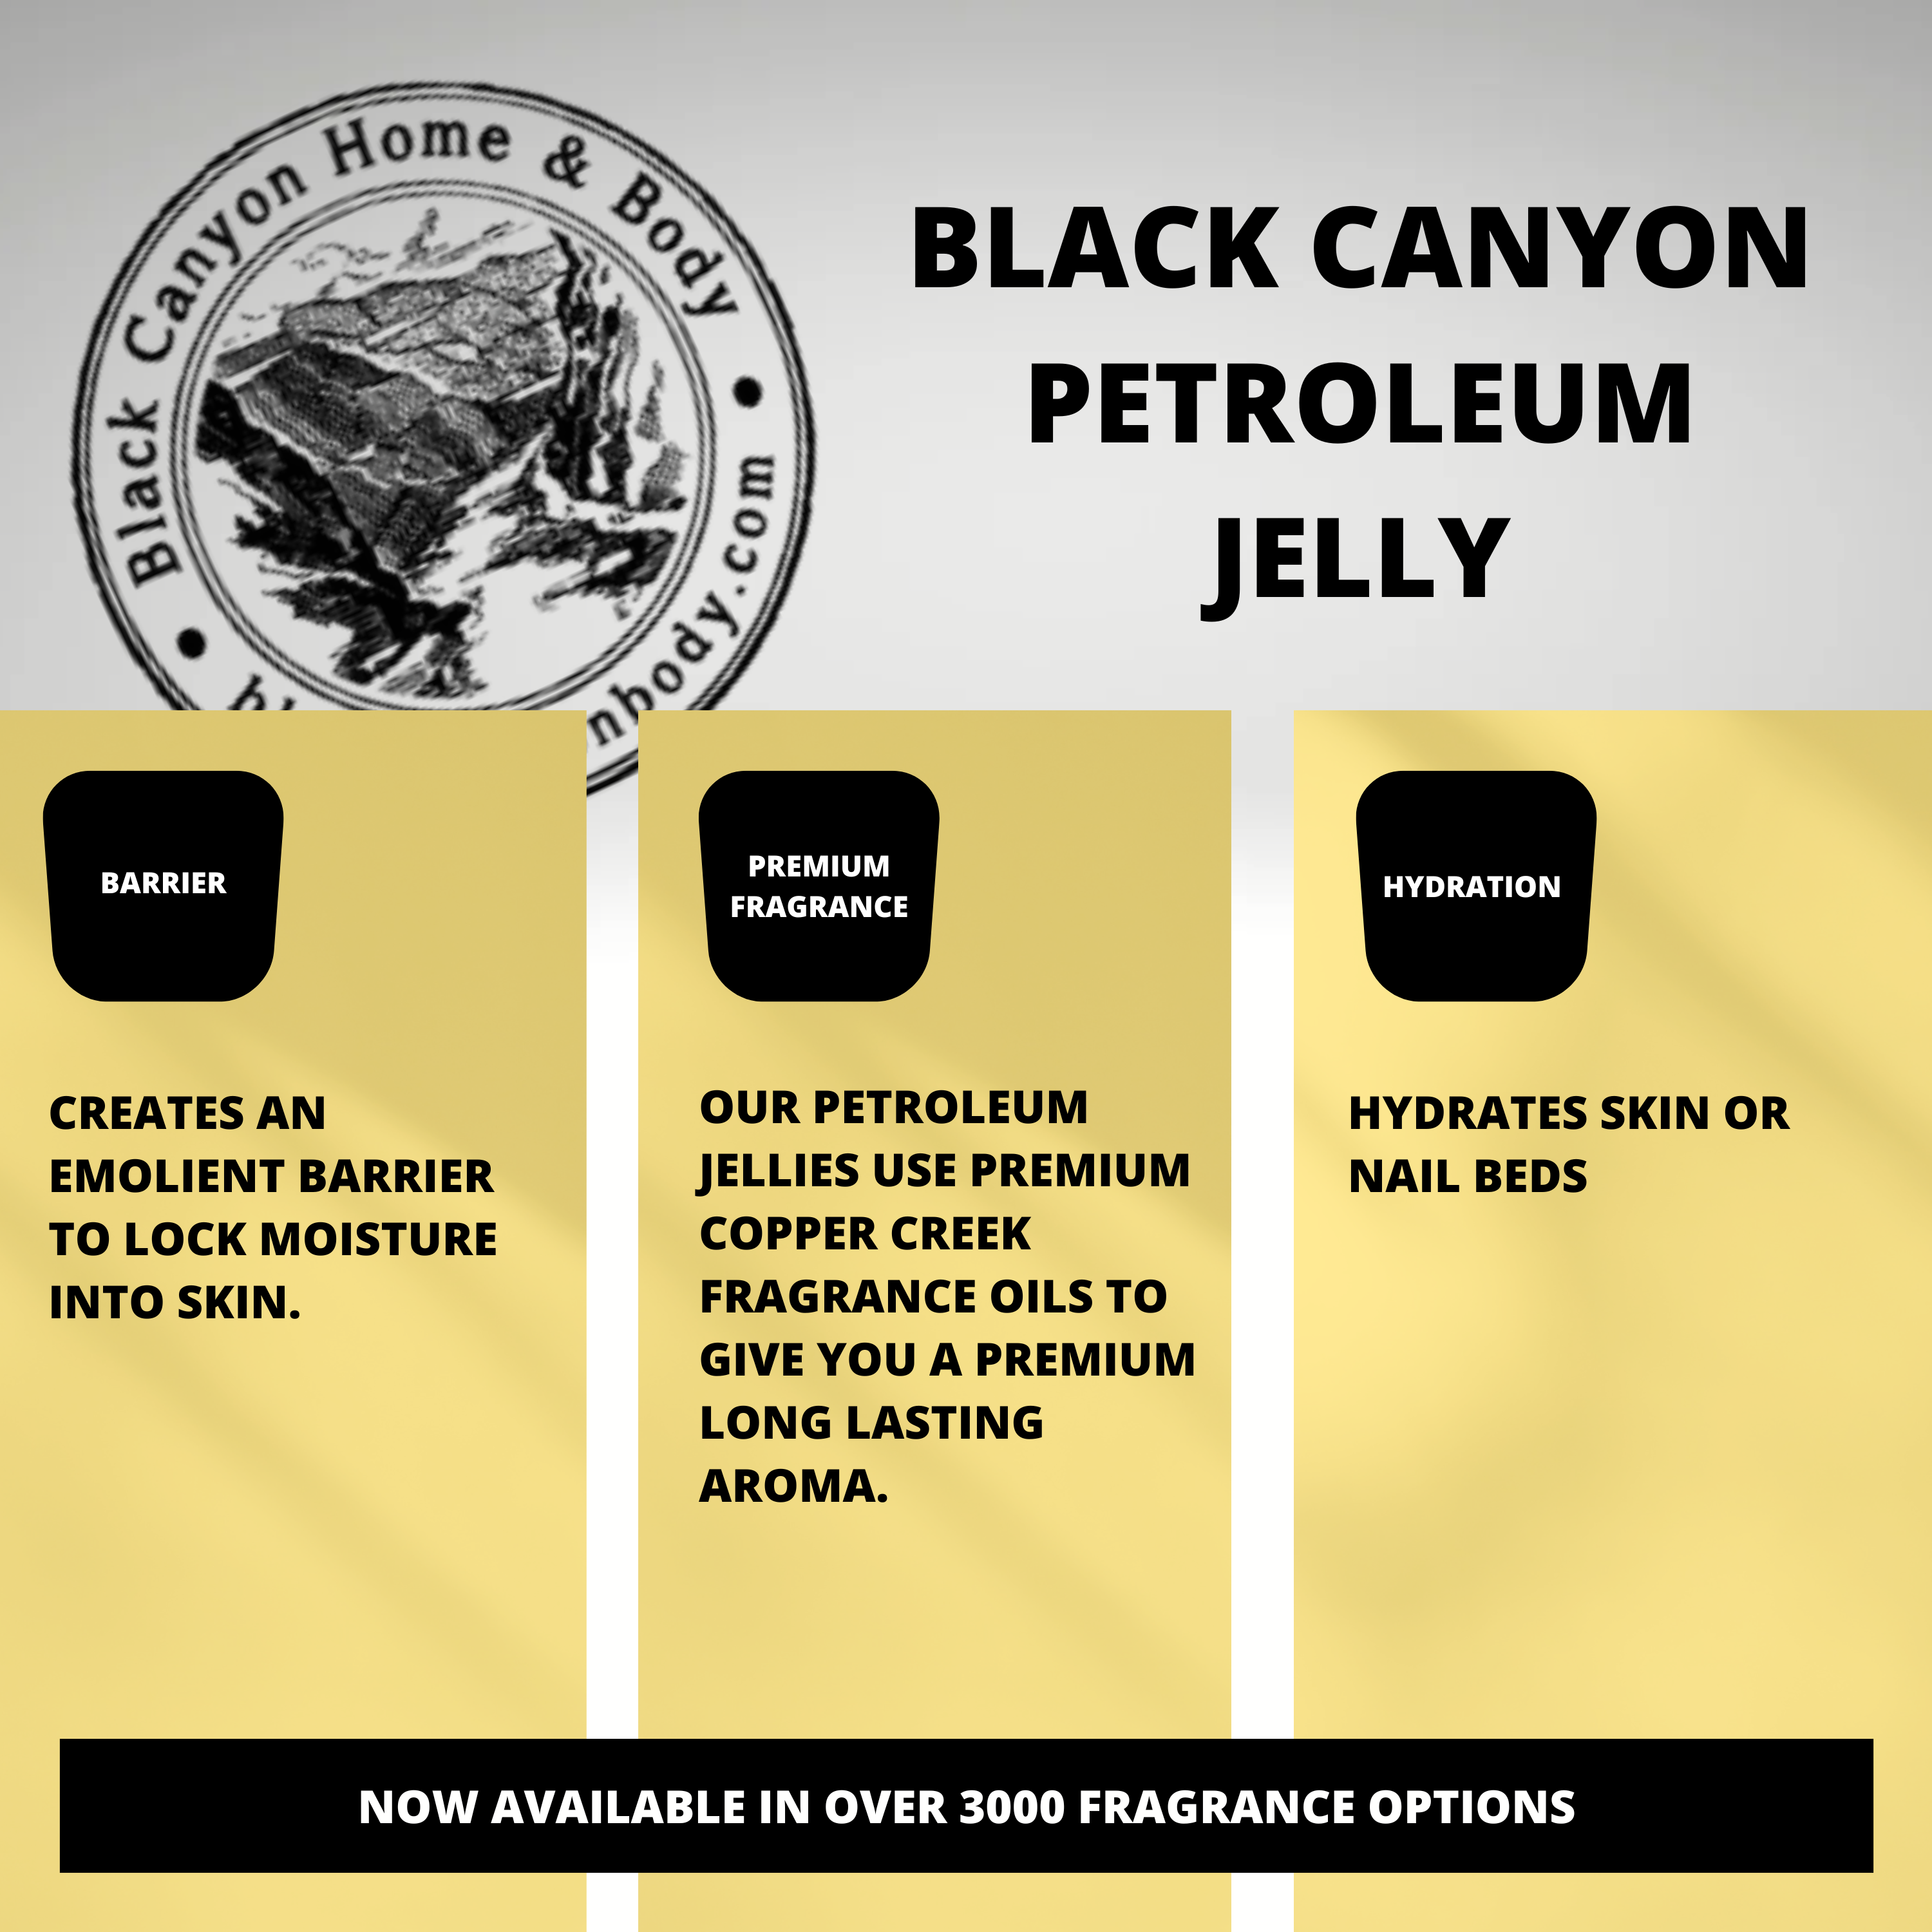 Black Canyon Bitten Scented Petroleum Jelly